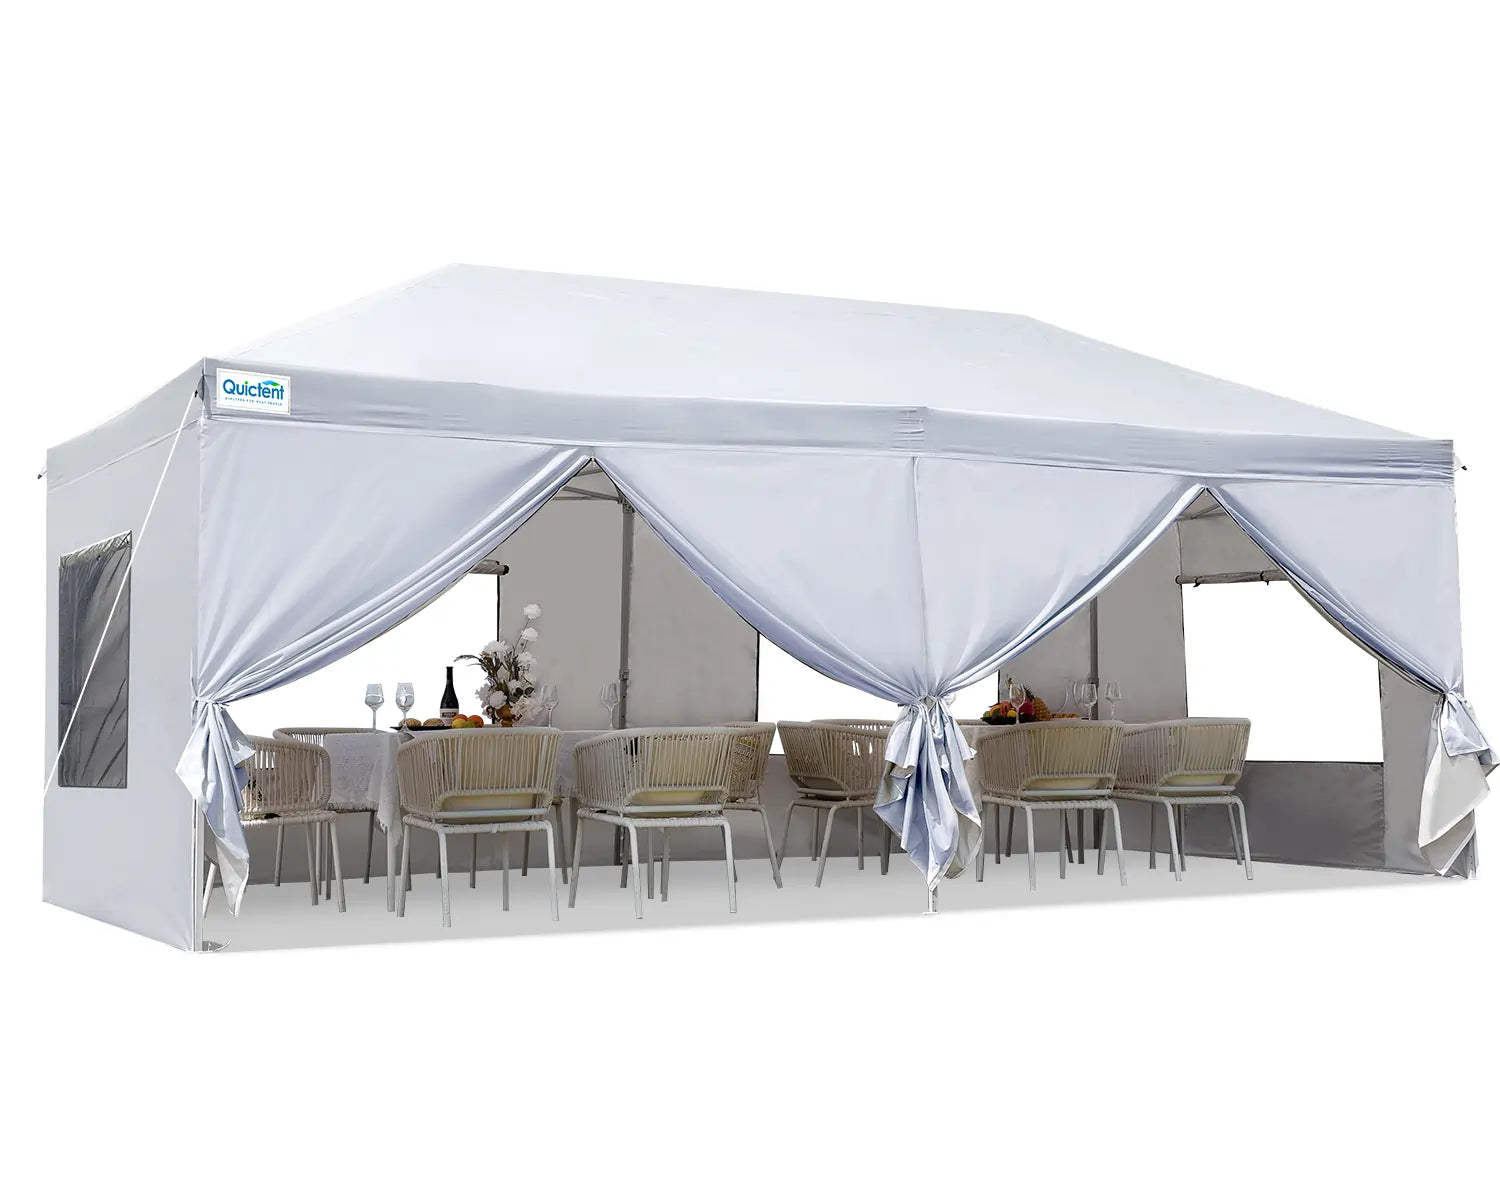 Quictent Privacy 8x8/10x10/10x20 Portable Pop Up Canopy with Sidewalls